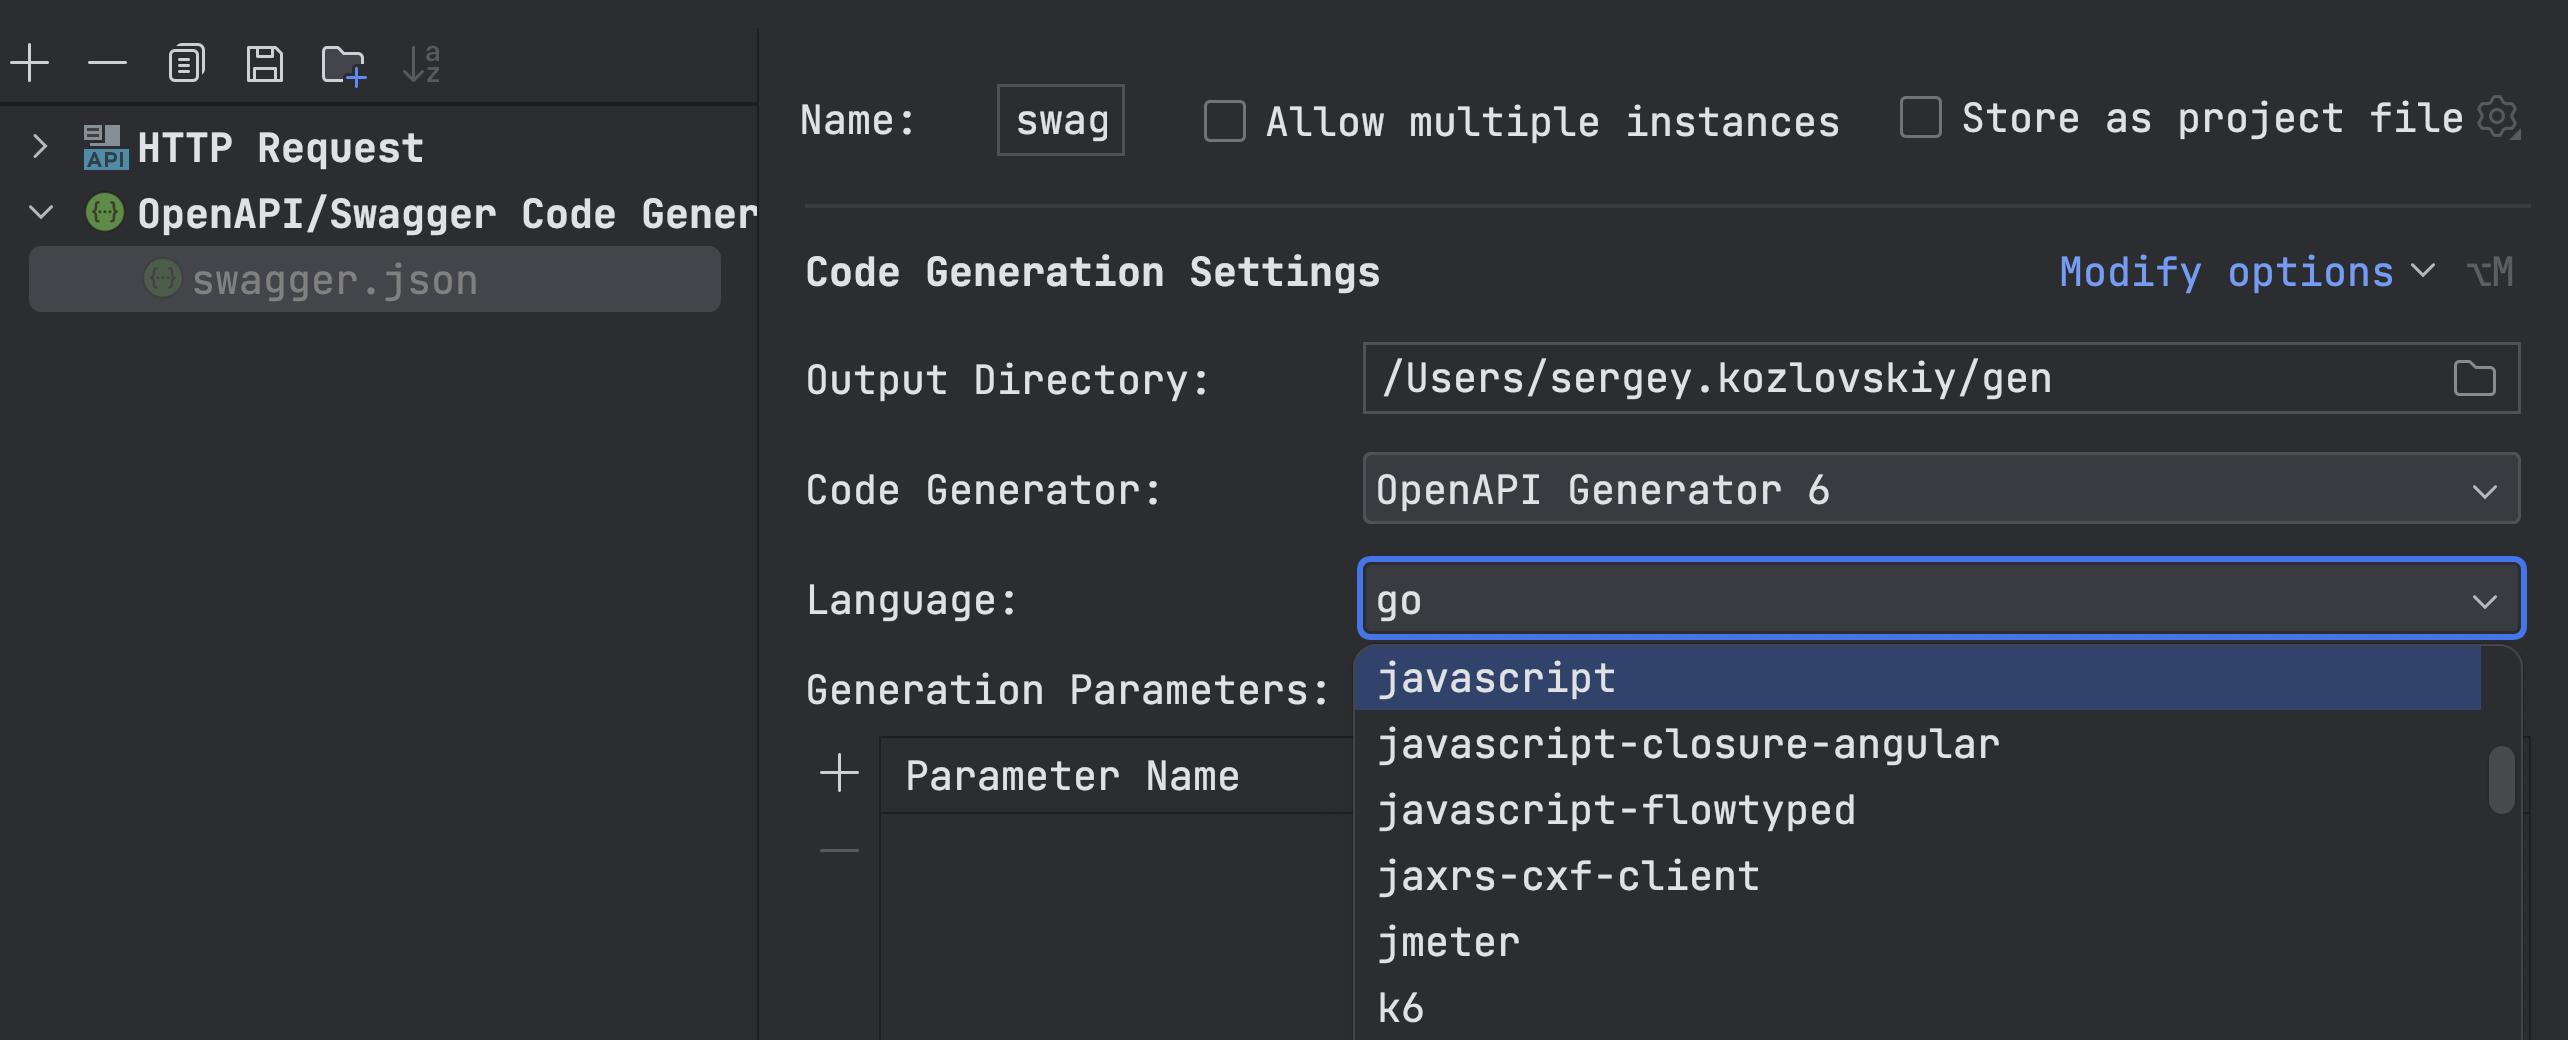 The reworked Edit Swagger Codegen Configuration dialog in GoLand